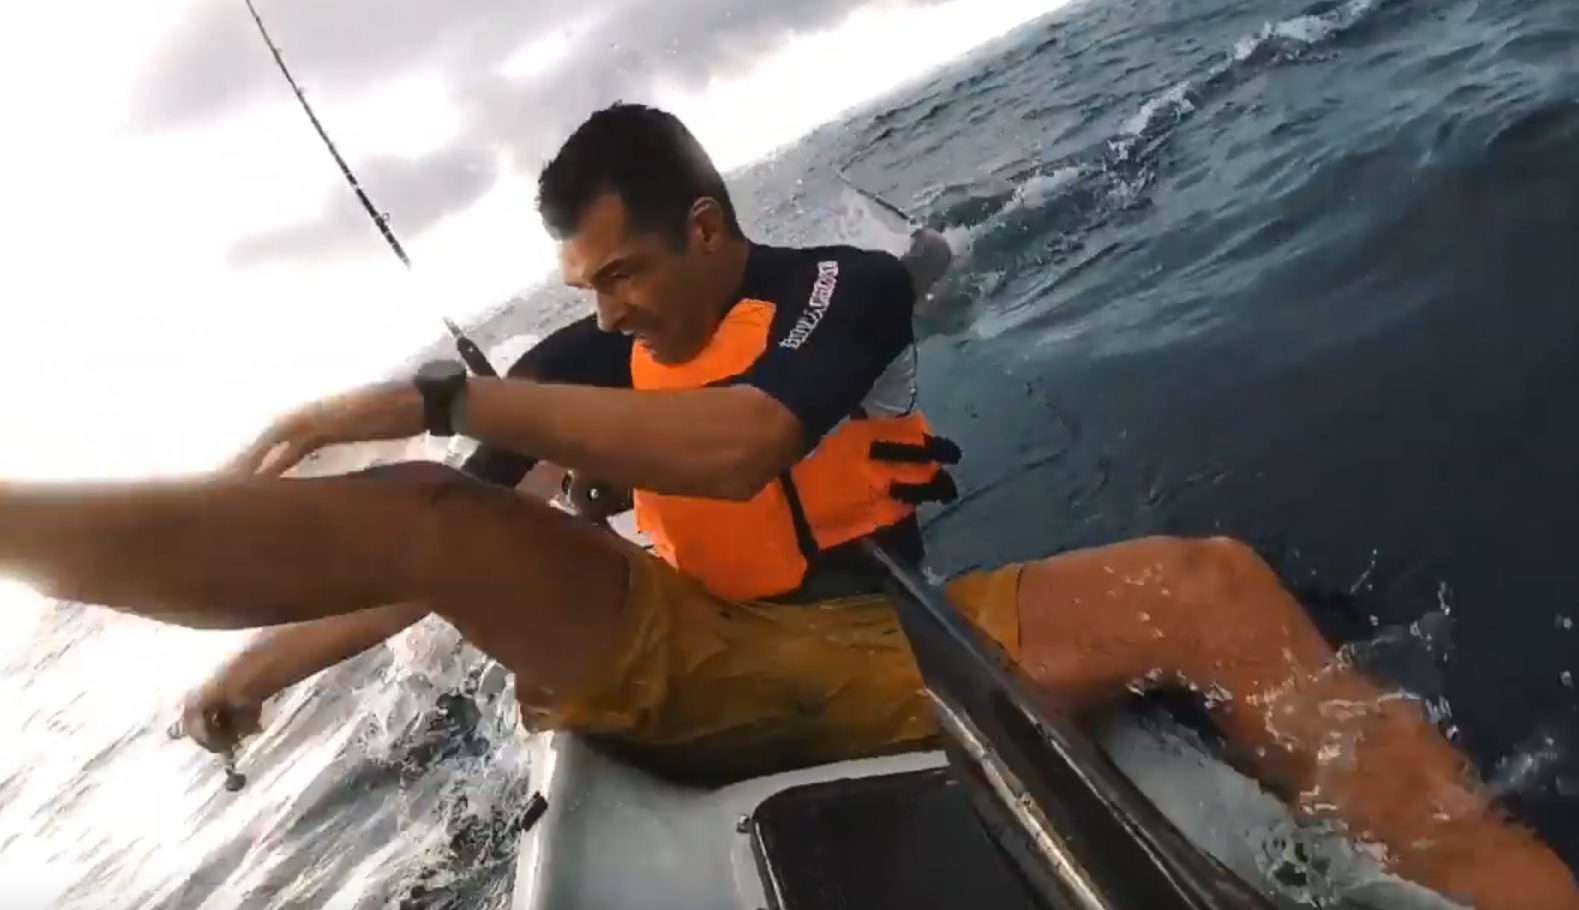 Scary Moment Kayaker Gets Attacked By Shark